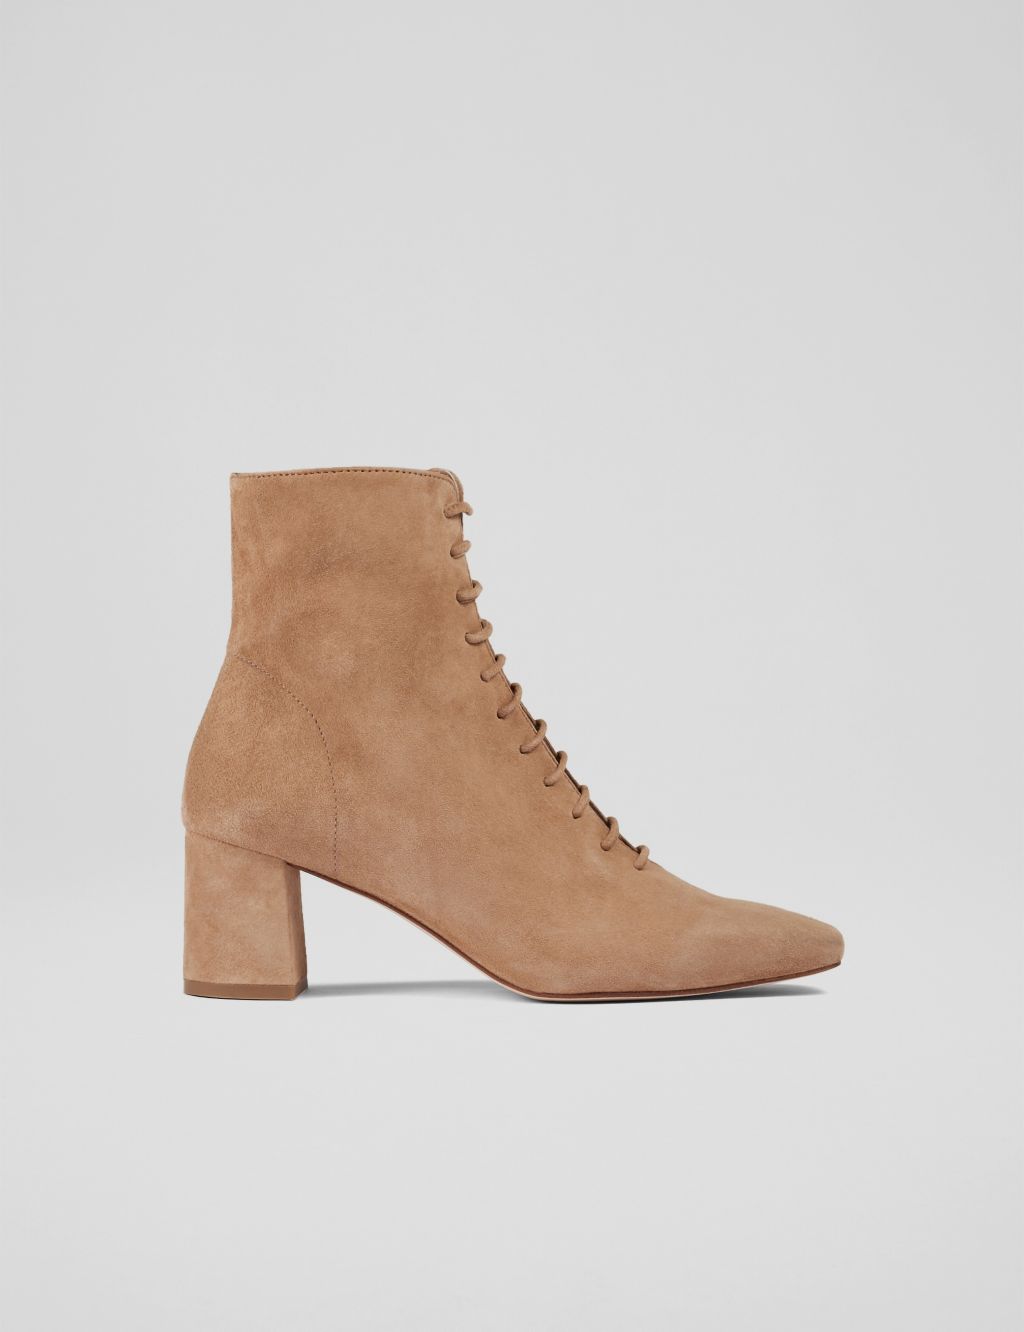 Suede Lace Up Block Heel Square Toe Ankle Boots